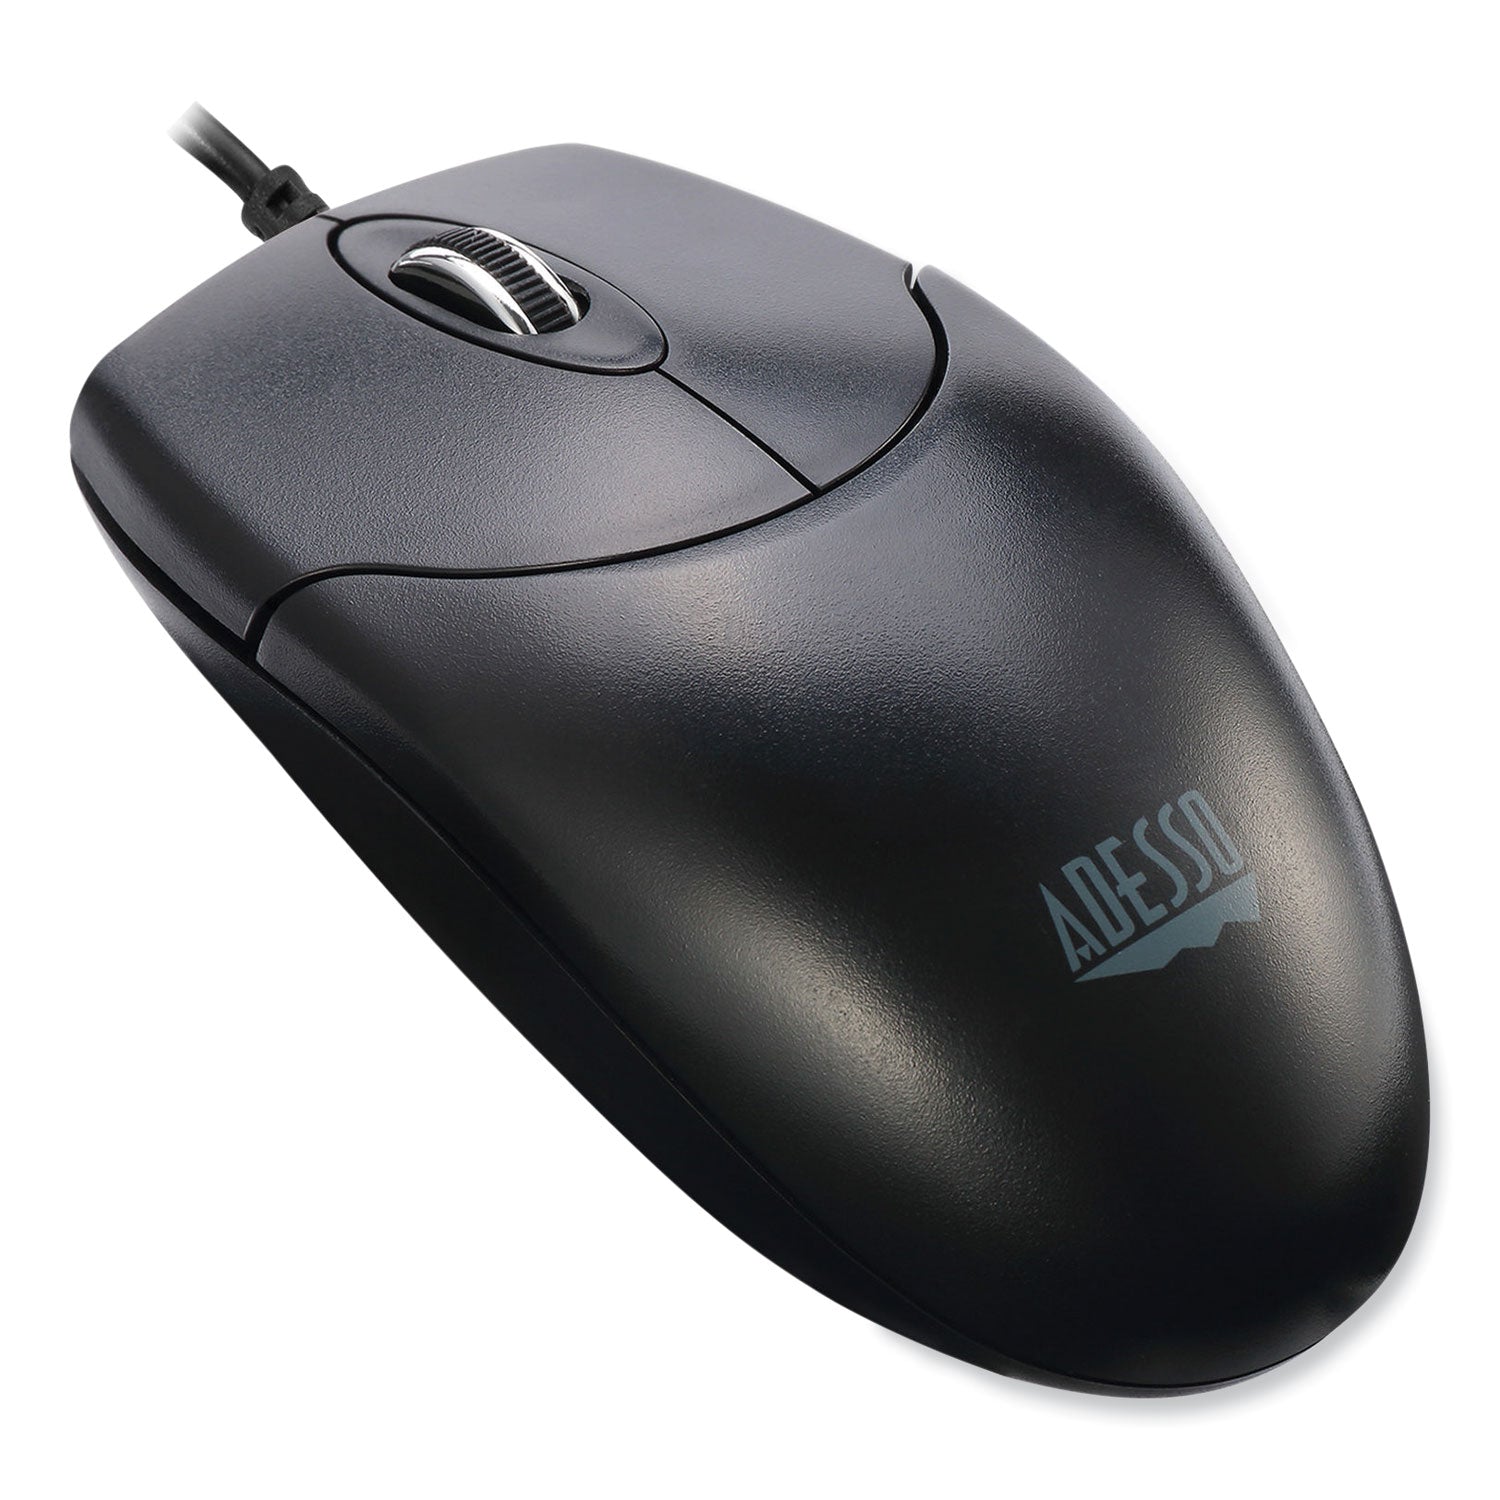 imouse-desktop-full-sized-mouse-usb-left-right-hand-use-black_adeimousem6taa - 2